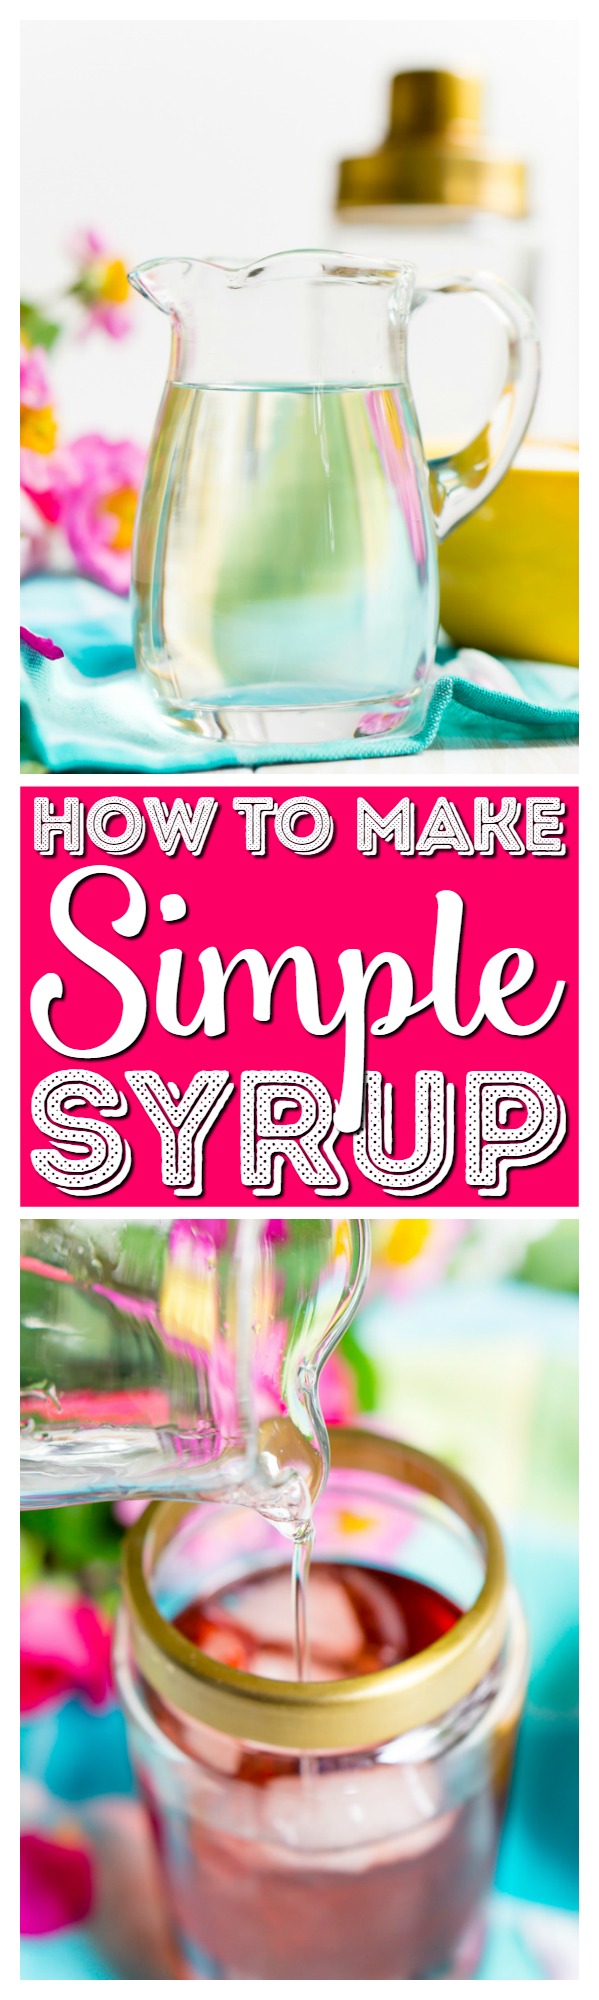 How To Make Simple Syrup at home in minutes with just water and sugar on the stove top. This syrup is the perfect way to sweeten cold drinks. via @sugarandsoulco